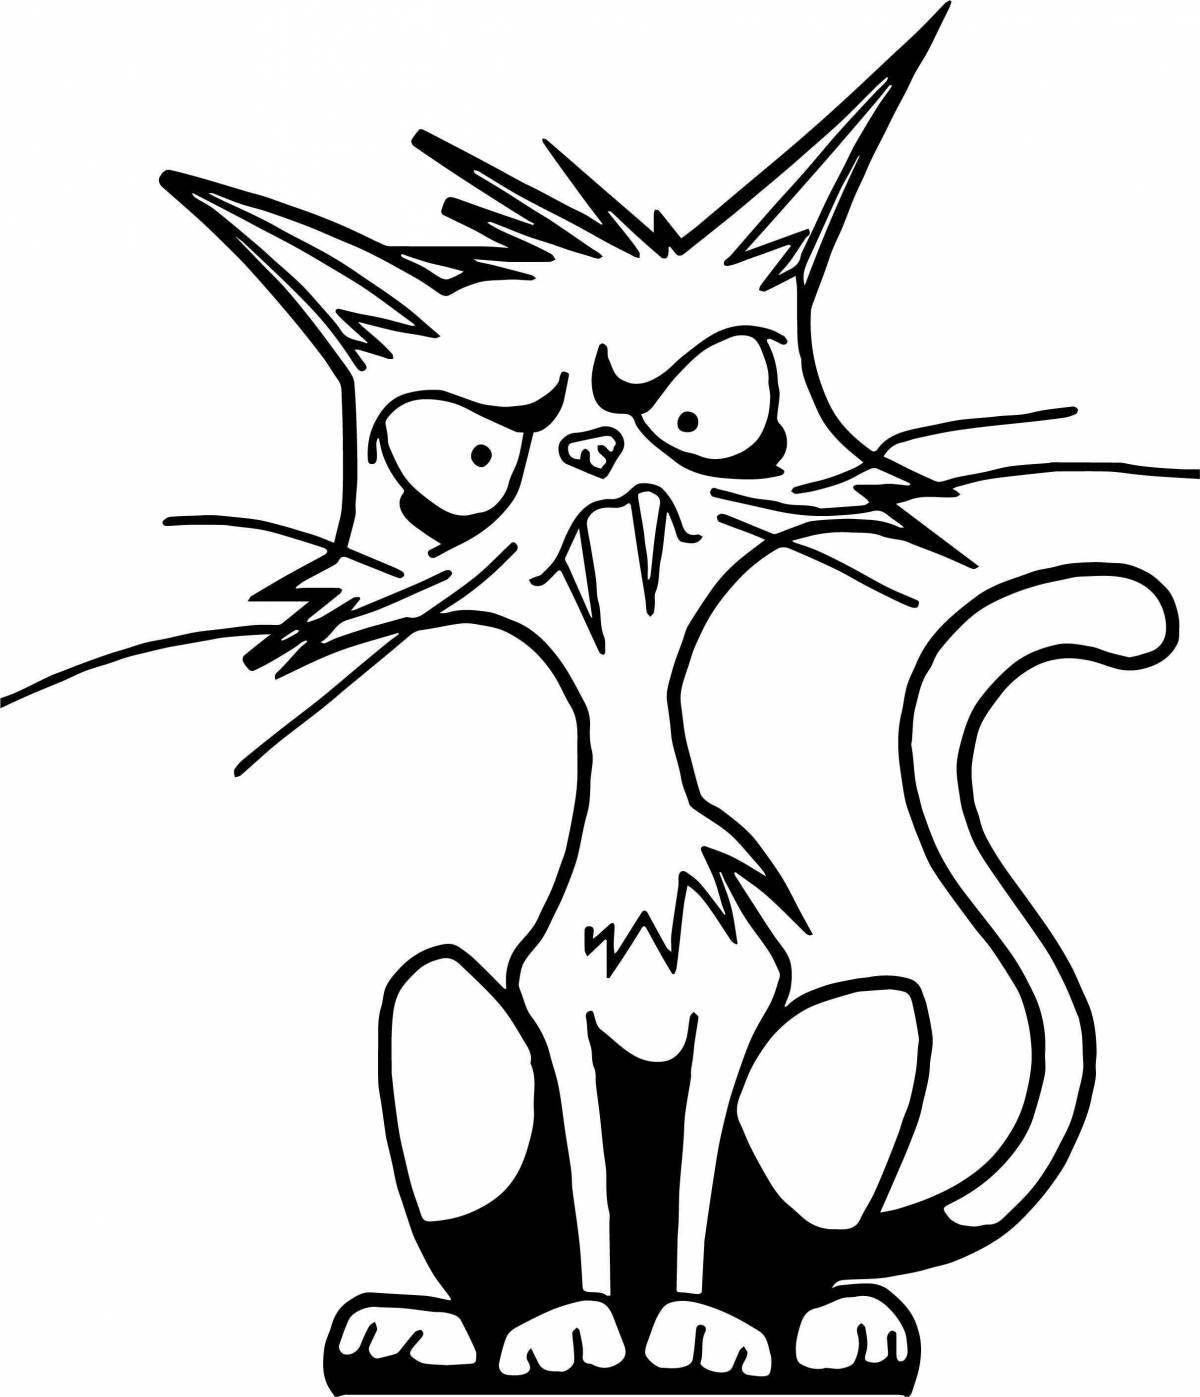 Cross angry cat coloring book